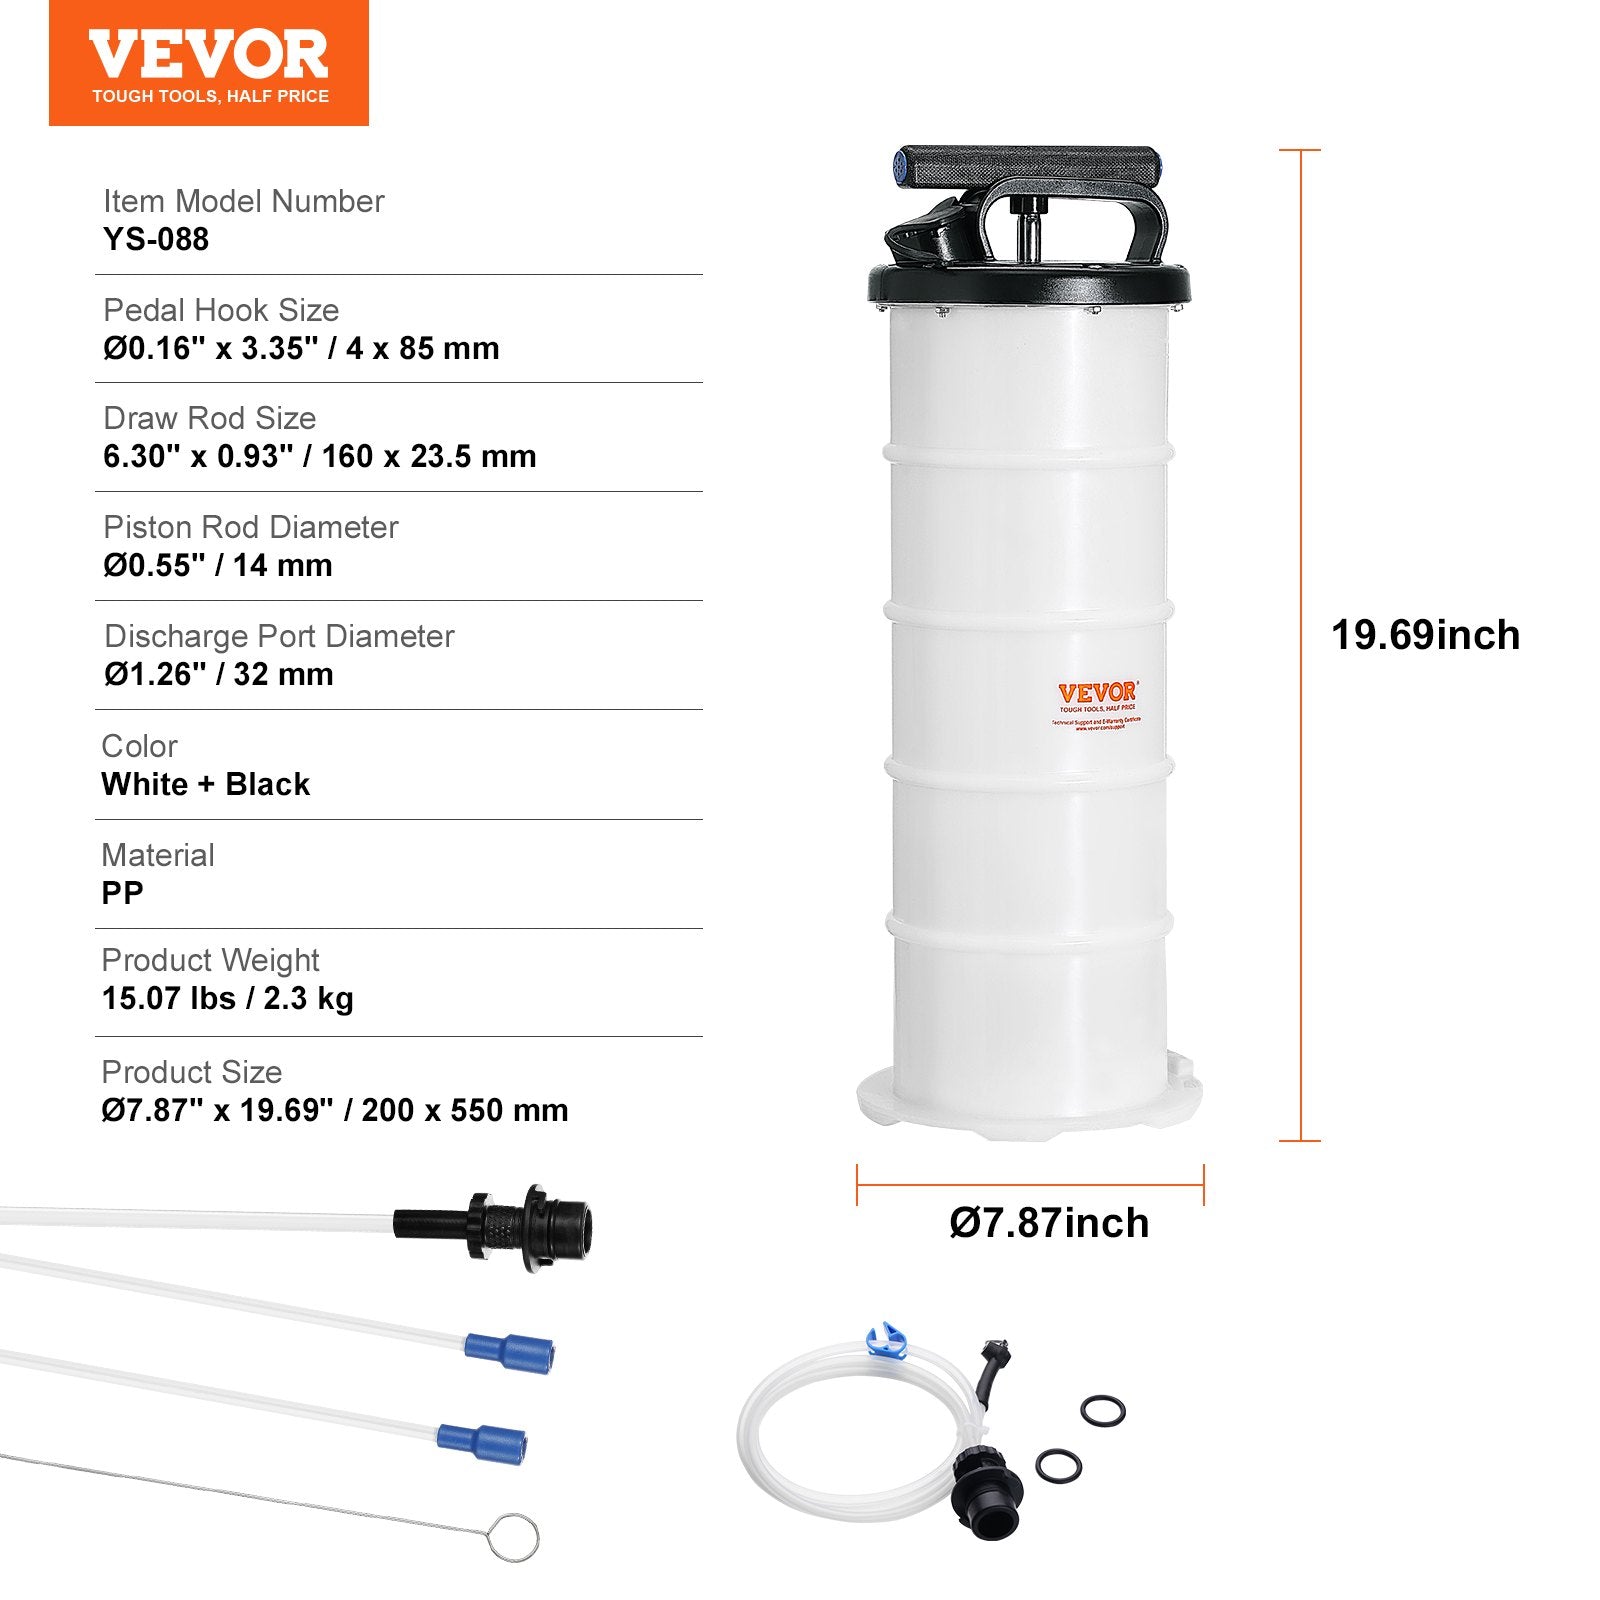 VEVOR Fluid Extractor, 1.74 Gallons (6.5 Liters), Manual Hand-Operated Oil Changer Vacuum Fluid Extractor with Dipstick and Hose, Oil Extractor Change Pump for Automotive Fluids Vacuum Evacuation-5